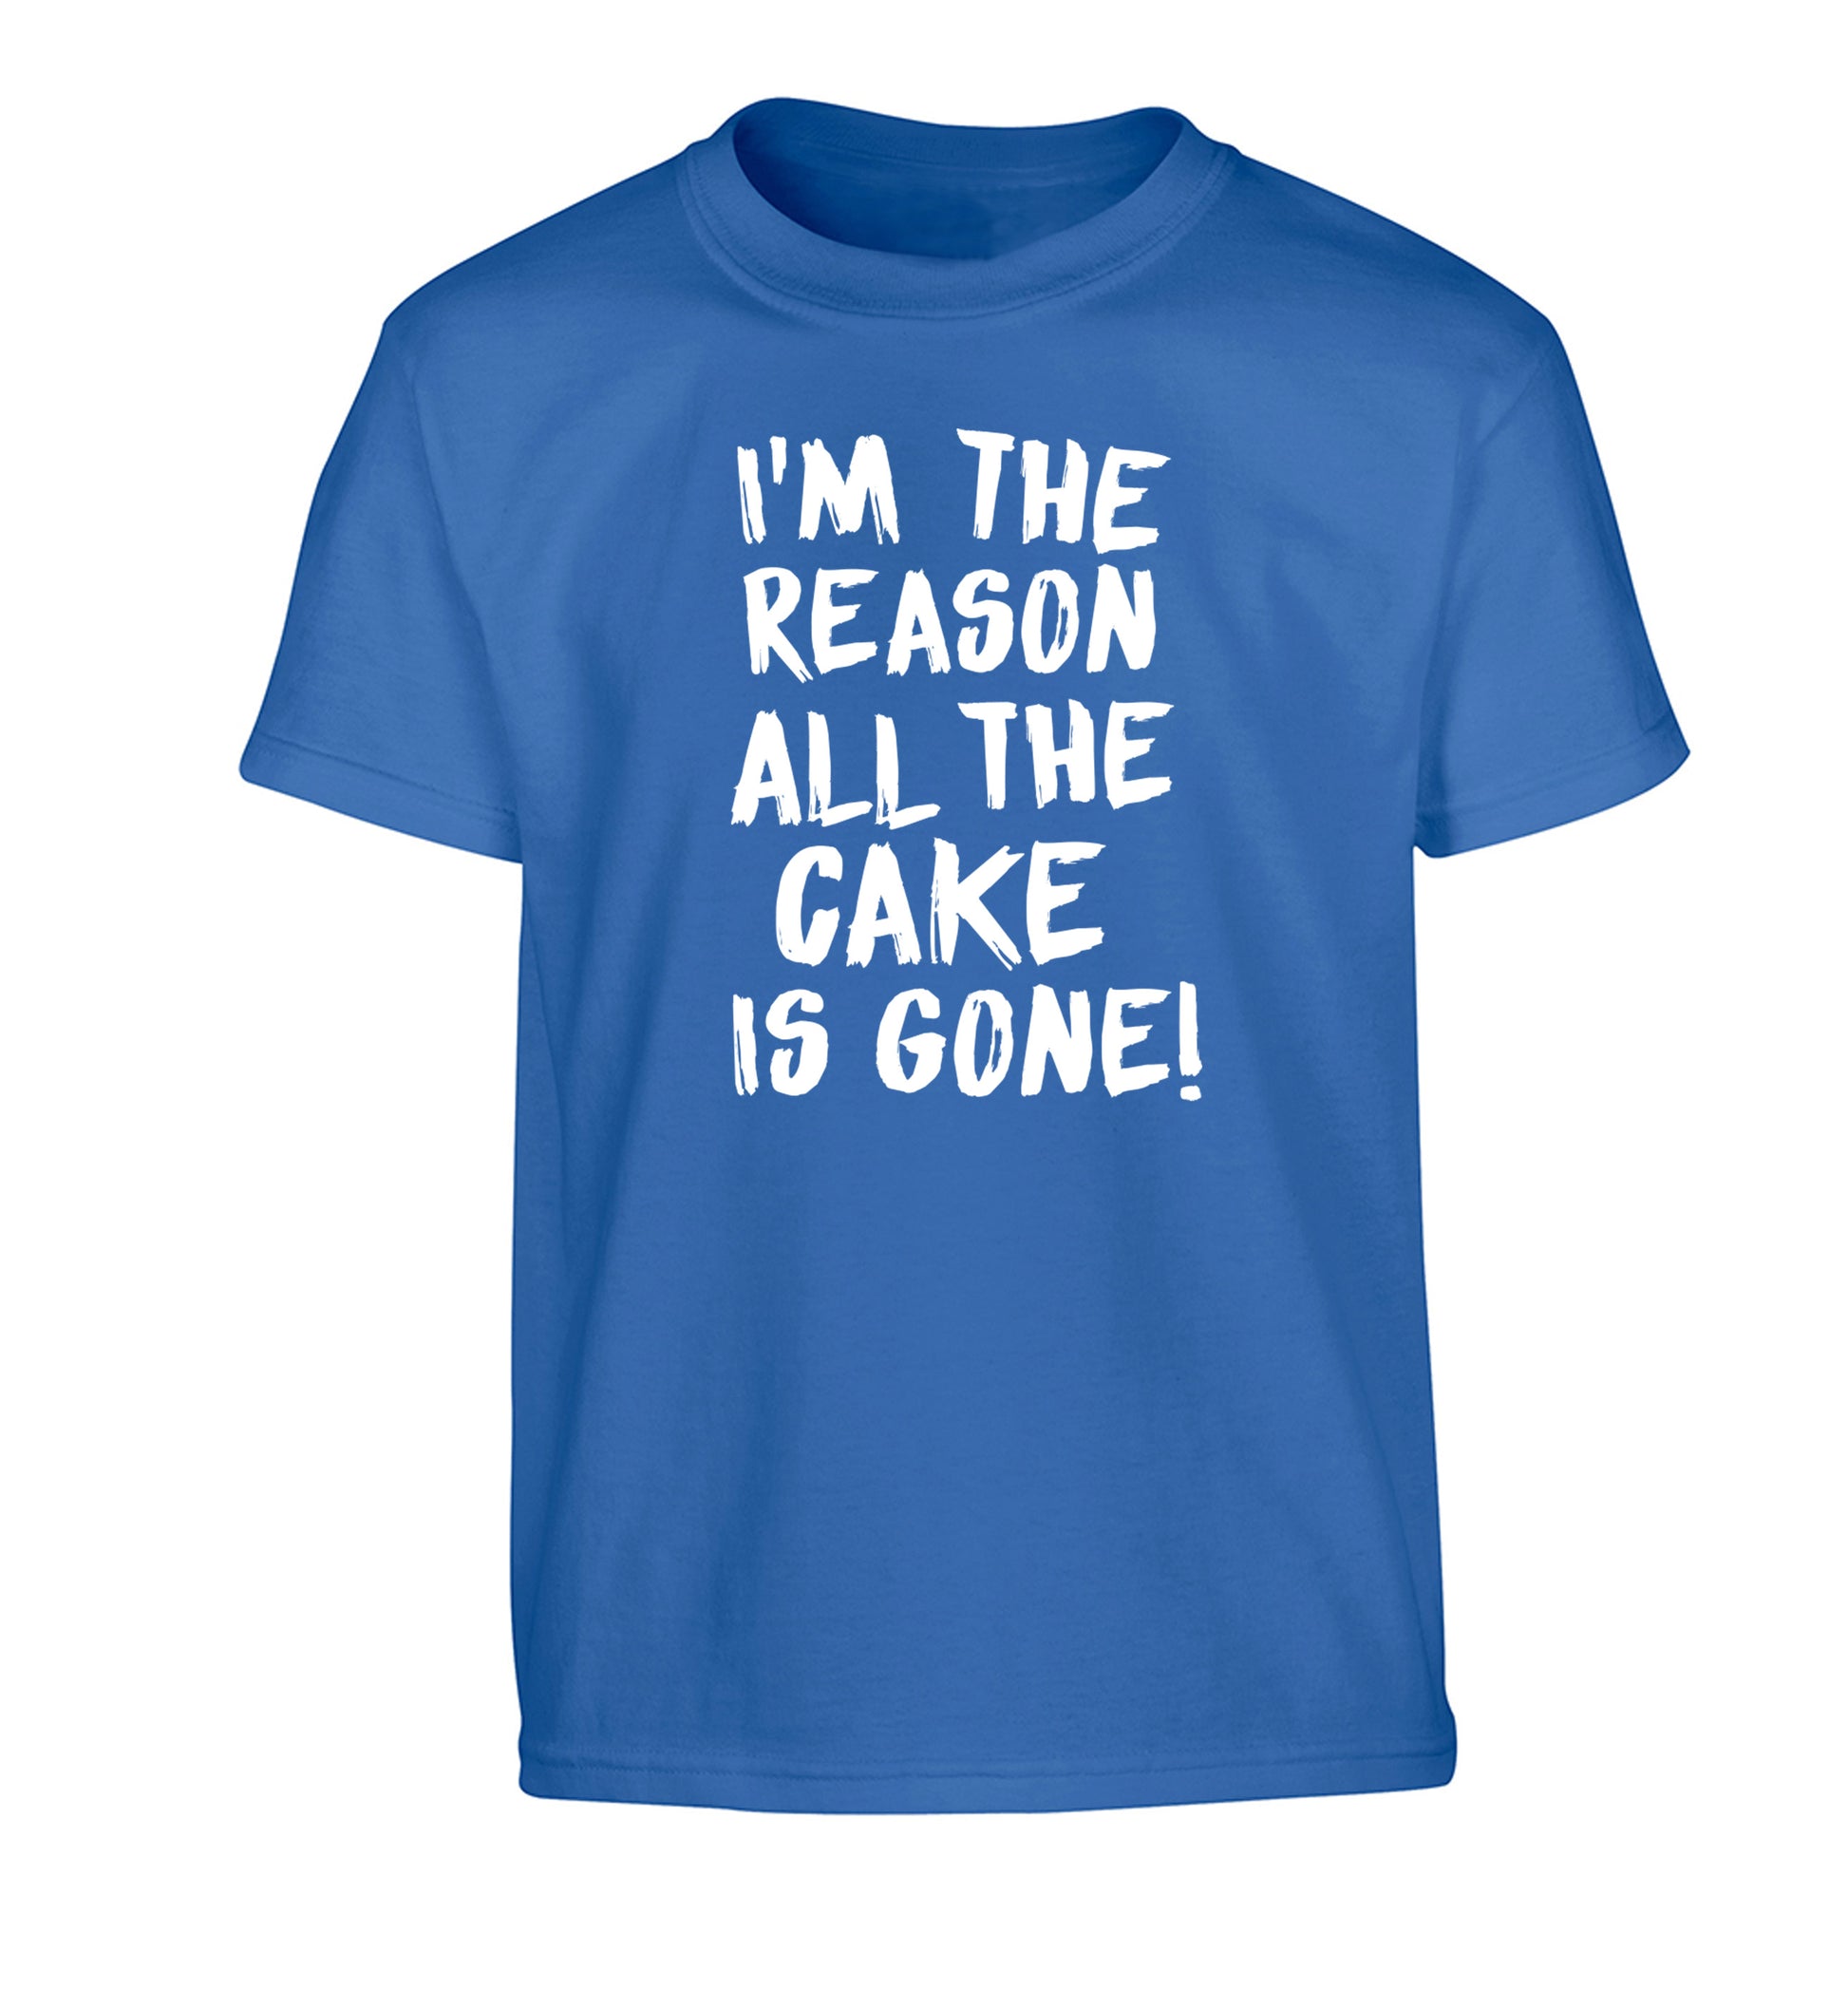 I'm the reason all the cake is gone Children's blue Tshirt 12-13 Years